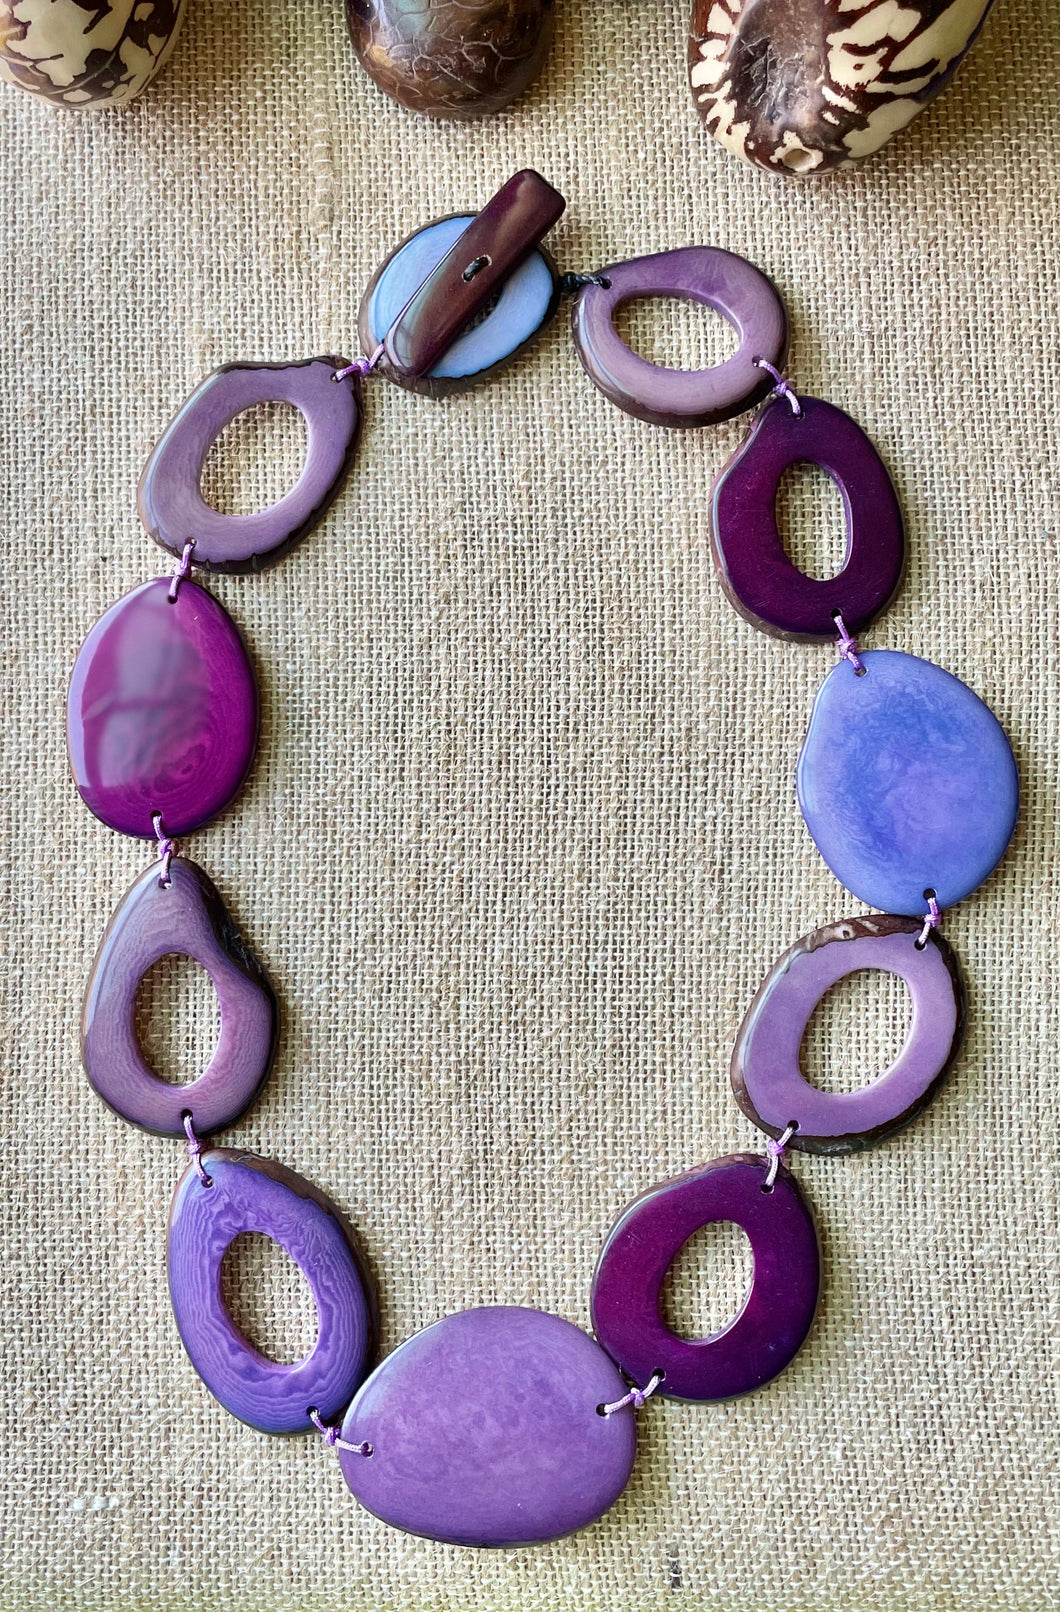 Shades of Purple Tagua Nut Necklace